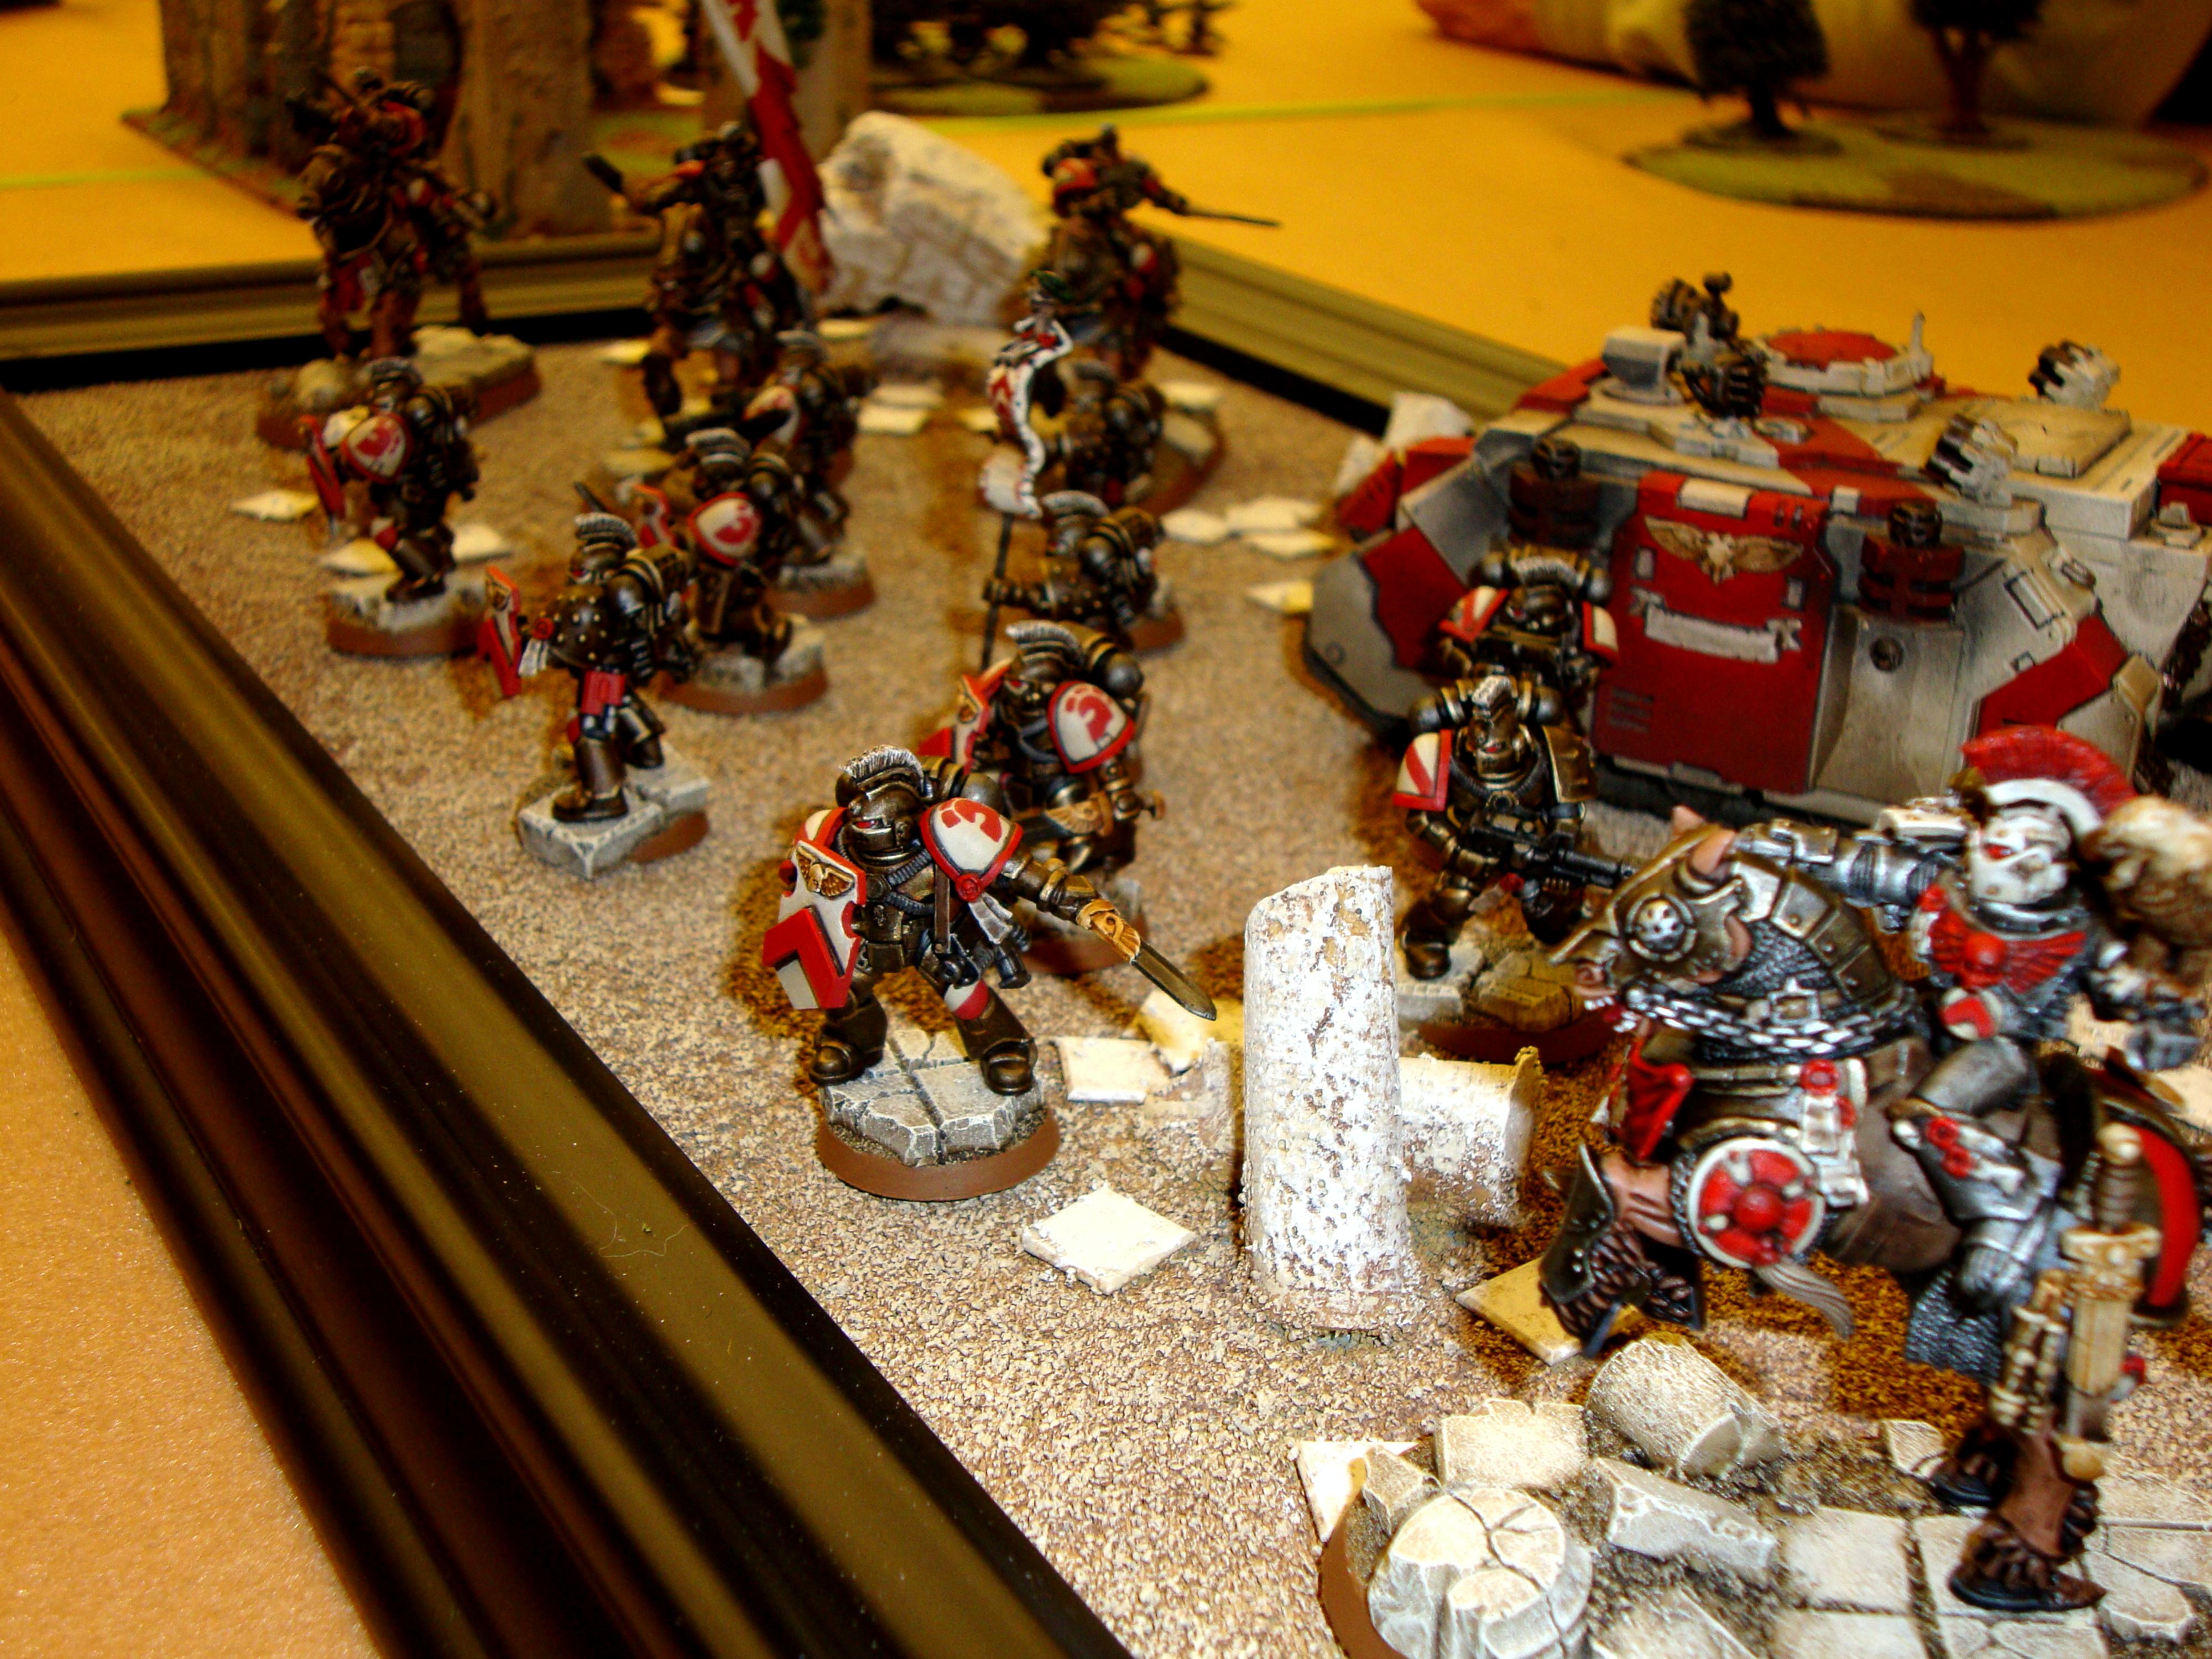 Mounted Space Marines, Space Marines